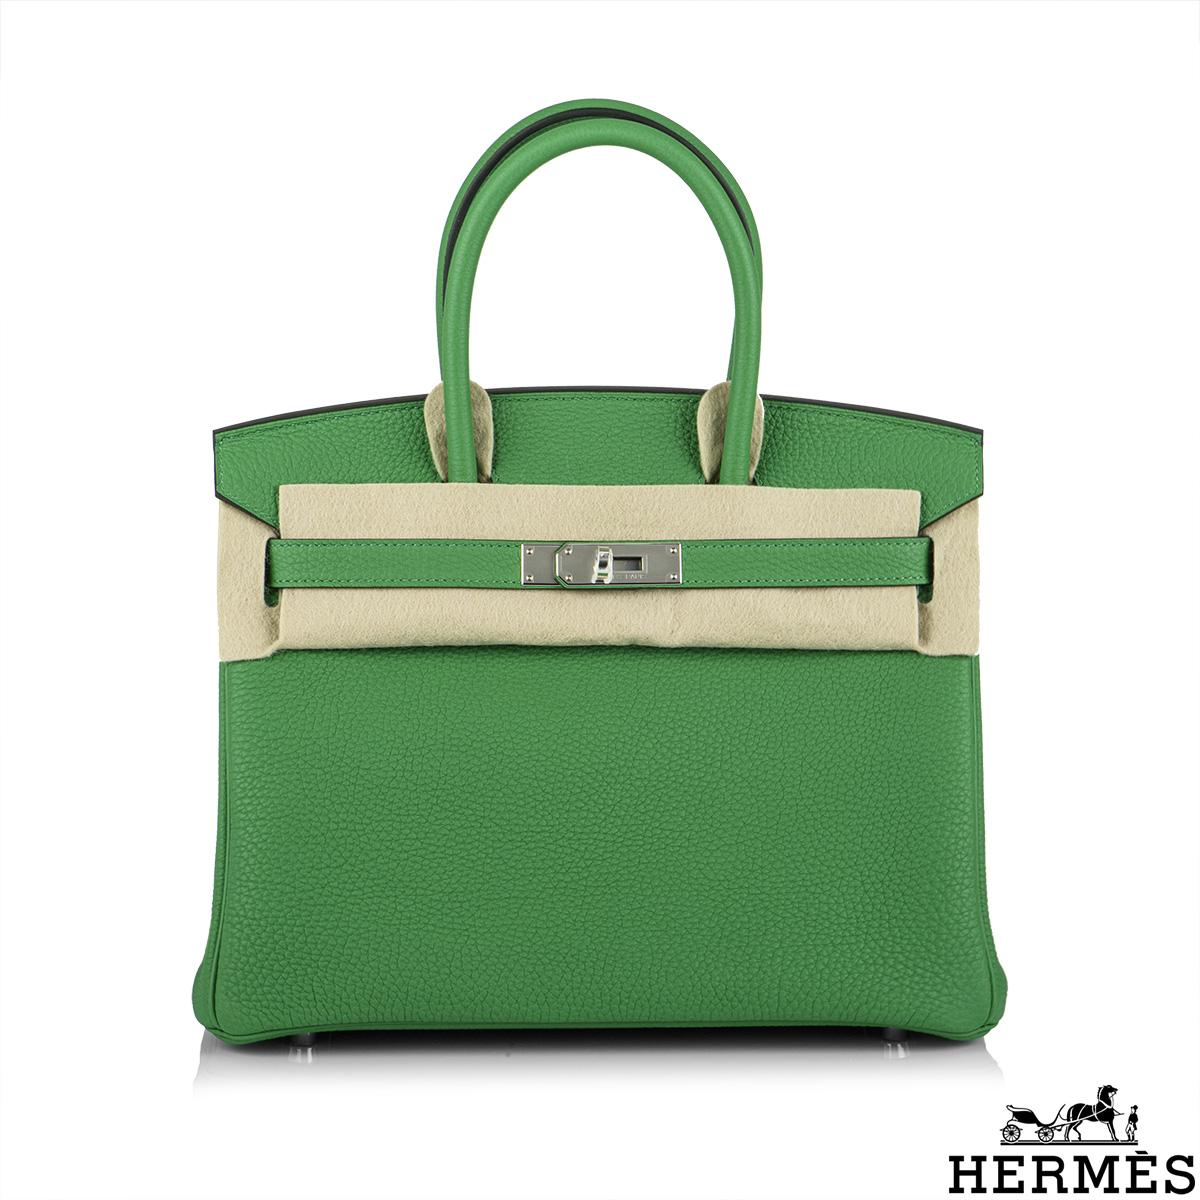 A Stunning Hermès Birkin Verso 30 Bag. The exterior of this Birkin features a togo leather in bambou and is detailed with palladium hardware. The interior is lined with contrast caramel chevre. The interior features a zipper pocket with an Hermès